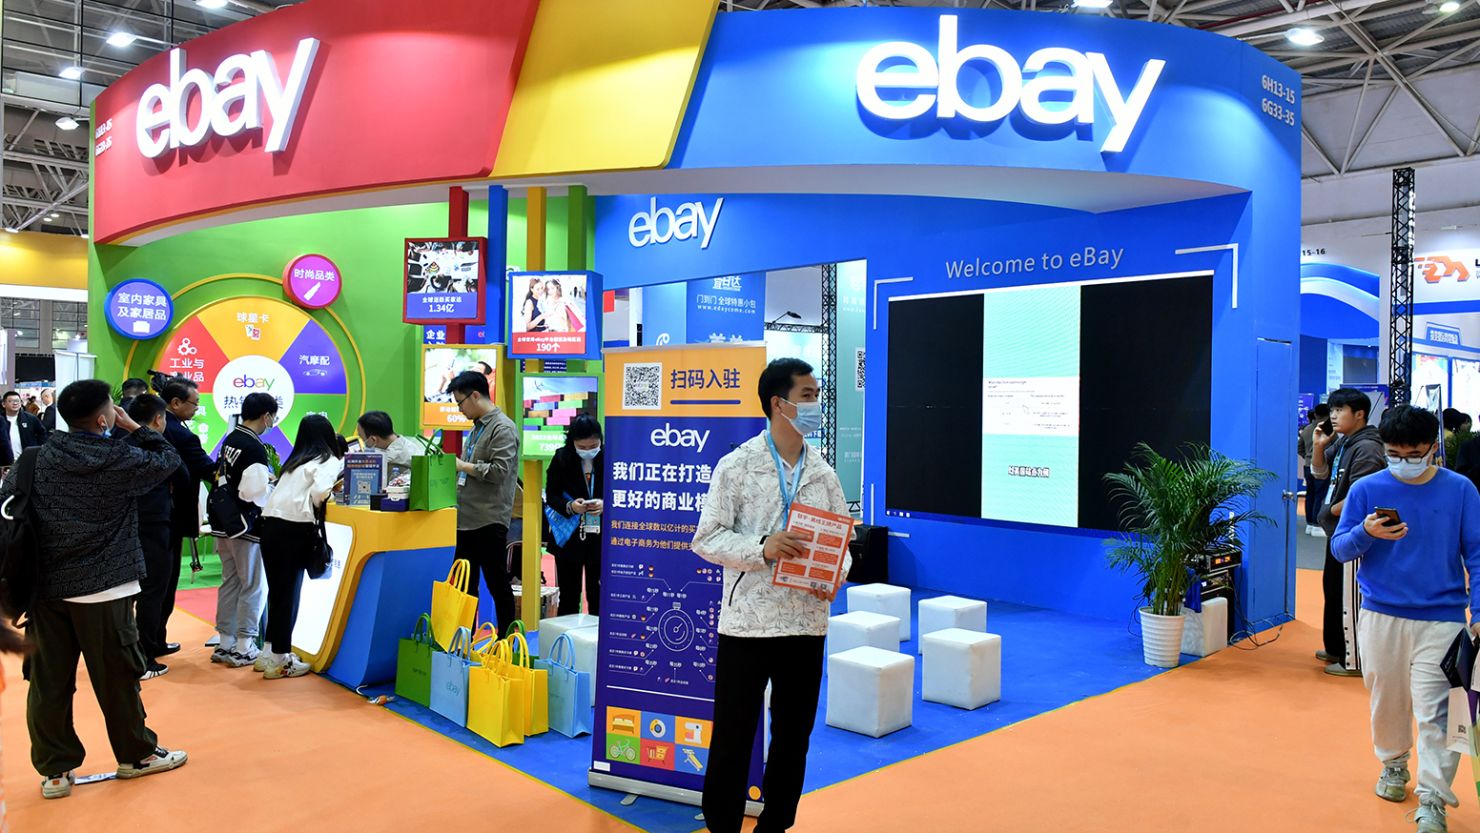 People visit the eBay booth during the 3rd China Cross-Border E-Commerce Trade Fair at Strait International Conference and Exhibition Center on March 18, 2023 in Fuzhou, Fujian Province of China.